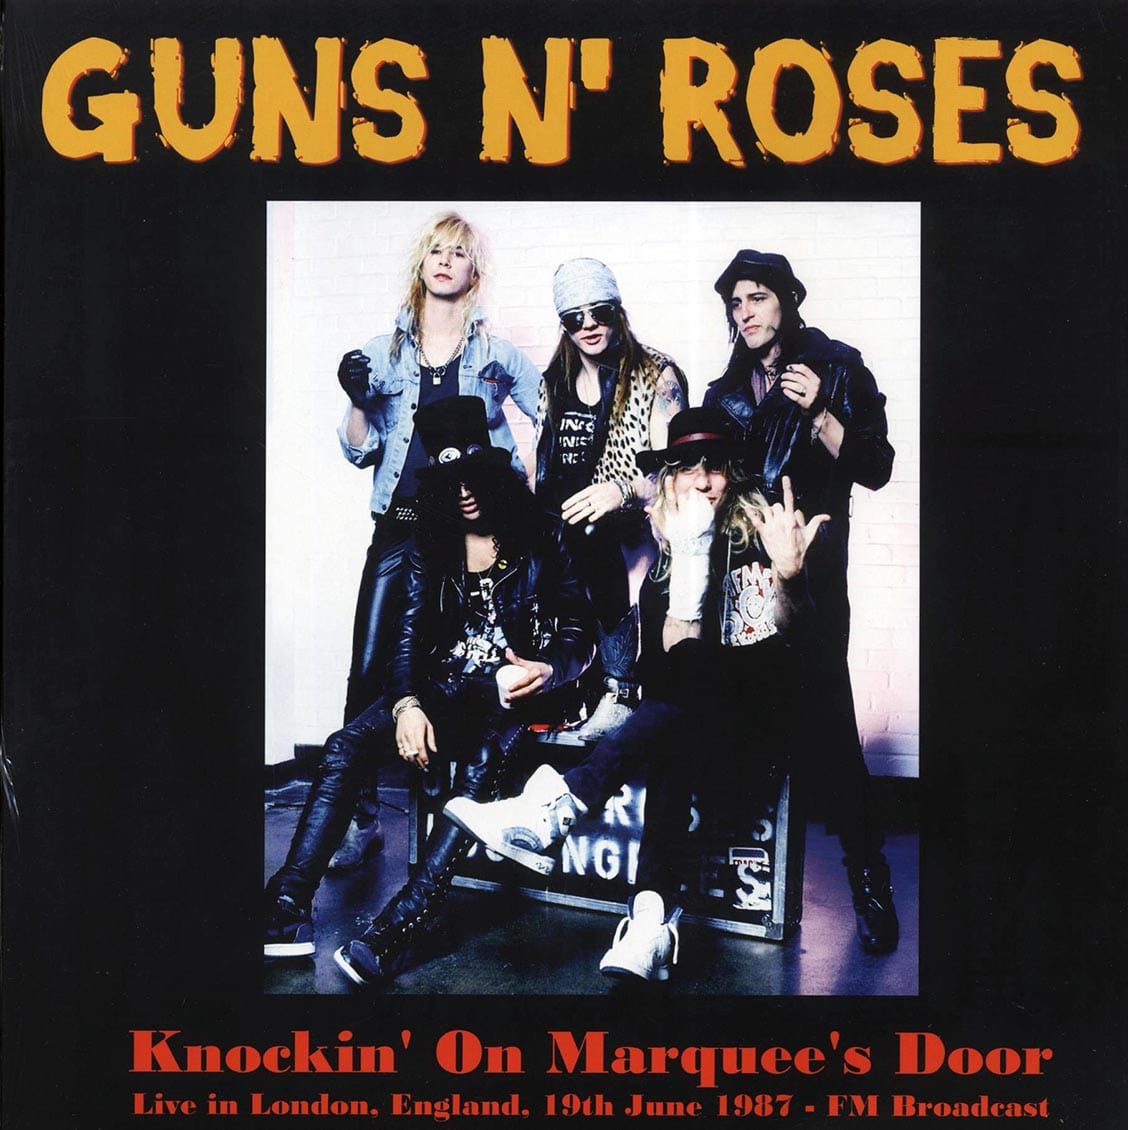 GUNS N' ROSES: Knockin' On Marquee's Door • Live In London, England, 19th June 1987 FM Broadcast (Ltd. 500 Copies) LP